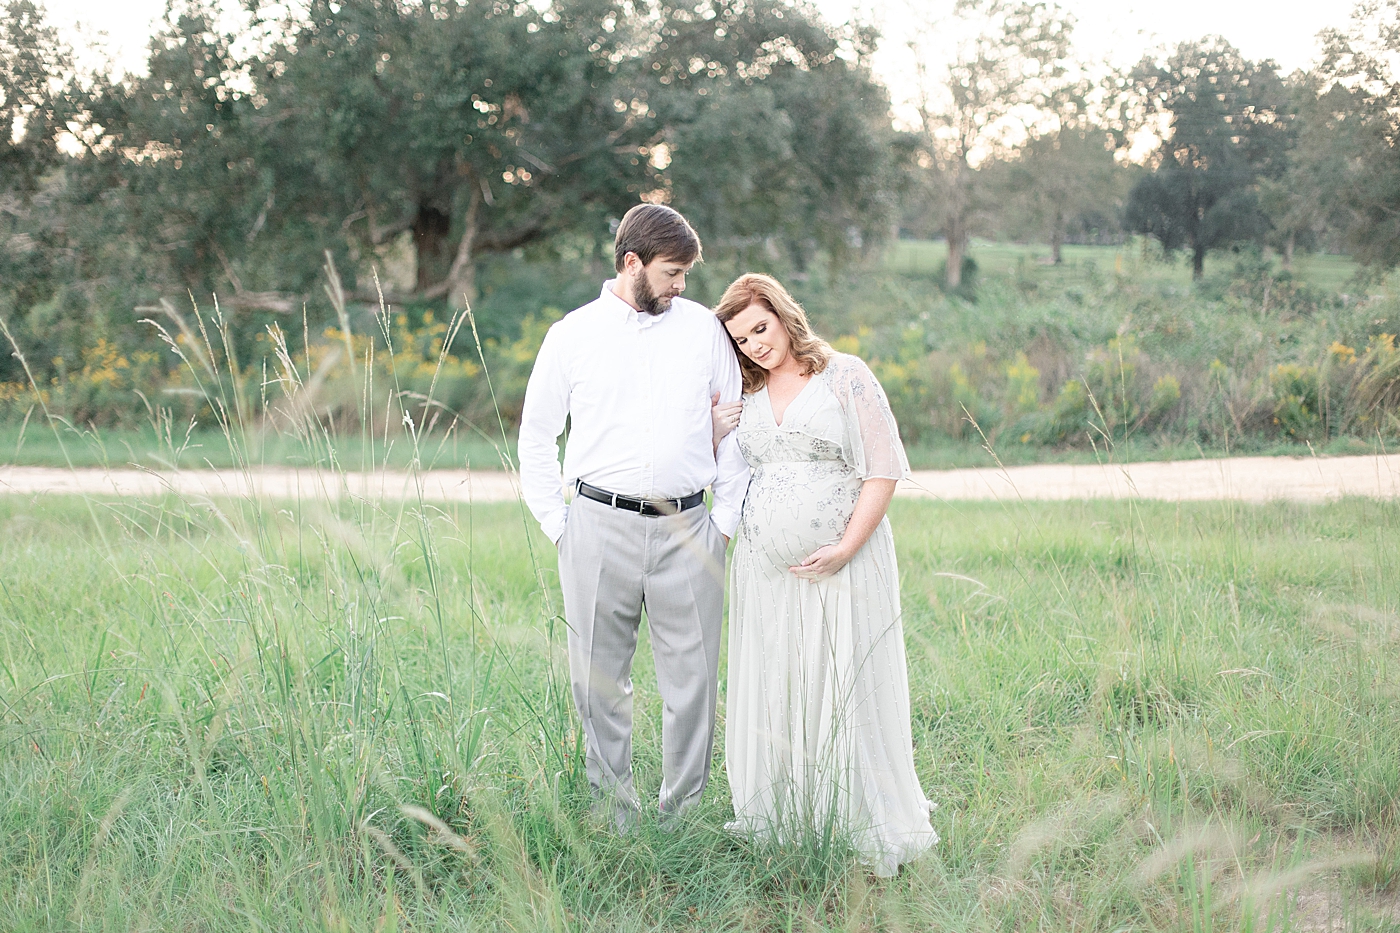 Mother to be and father to be standing in a field | Photo by Little Sunshine Photography